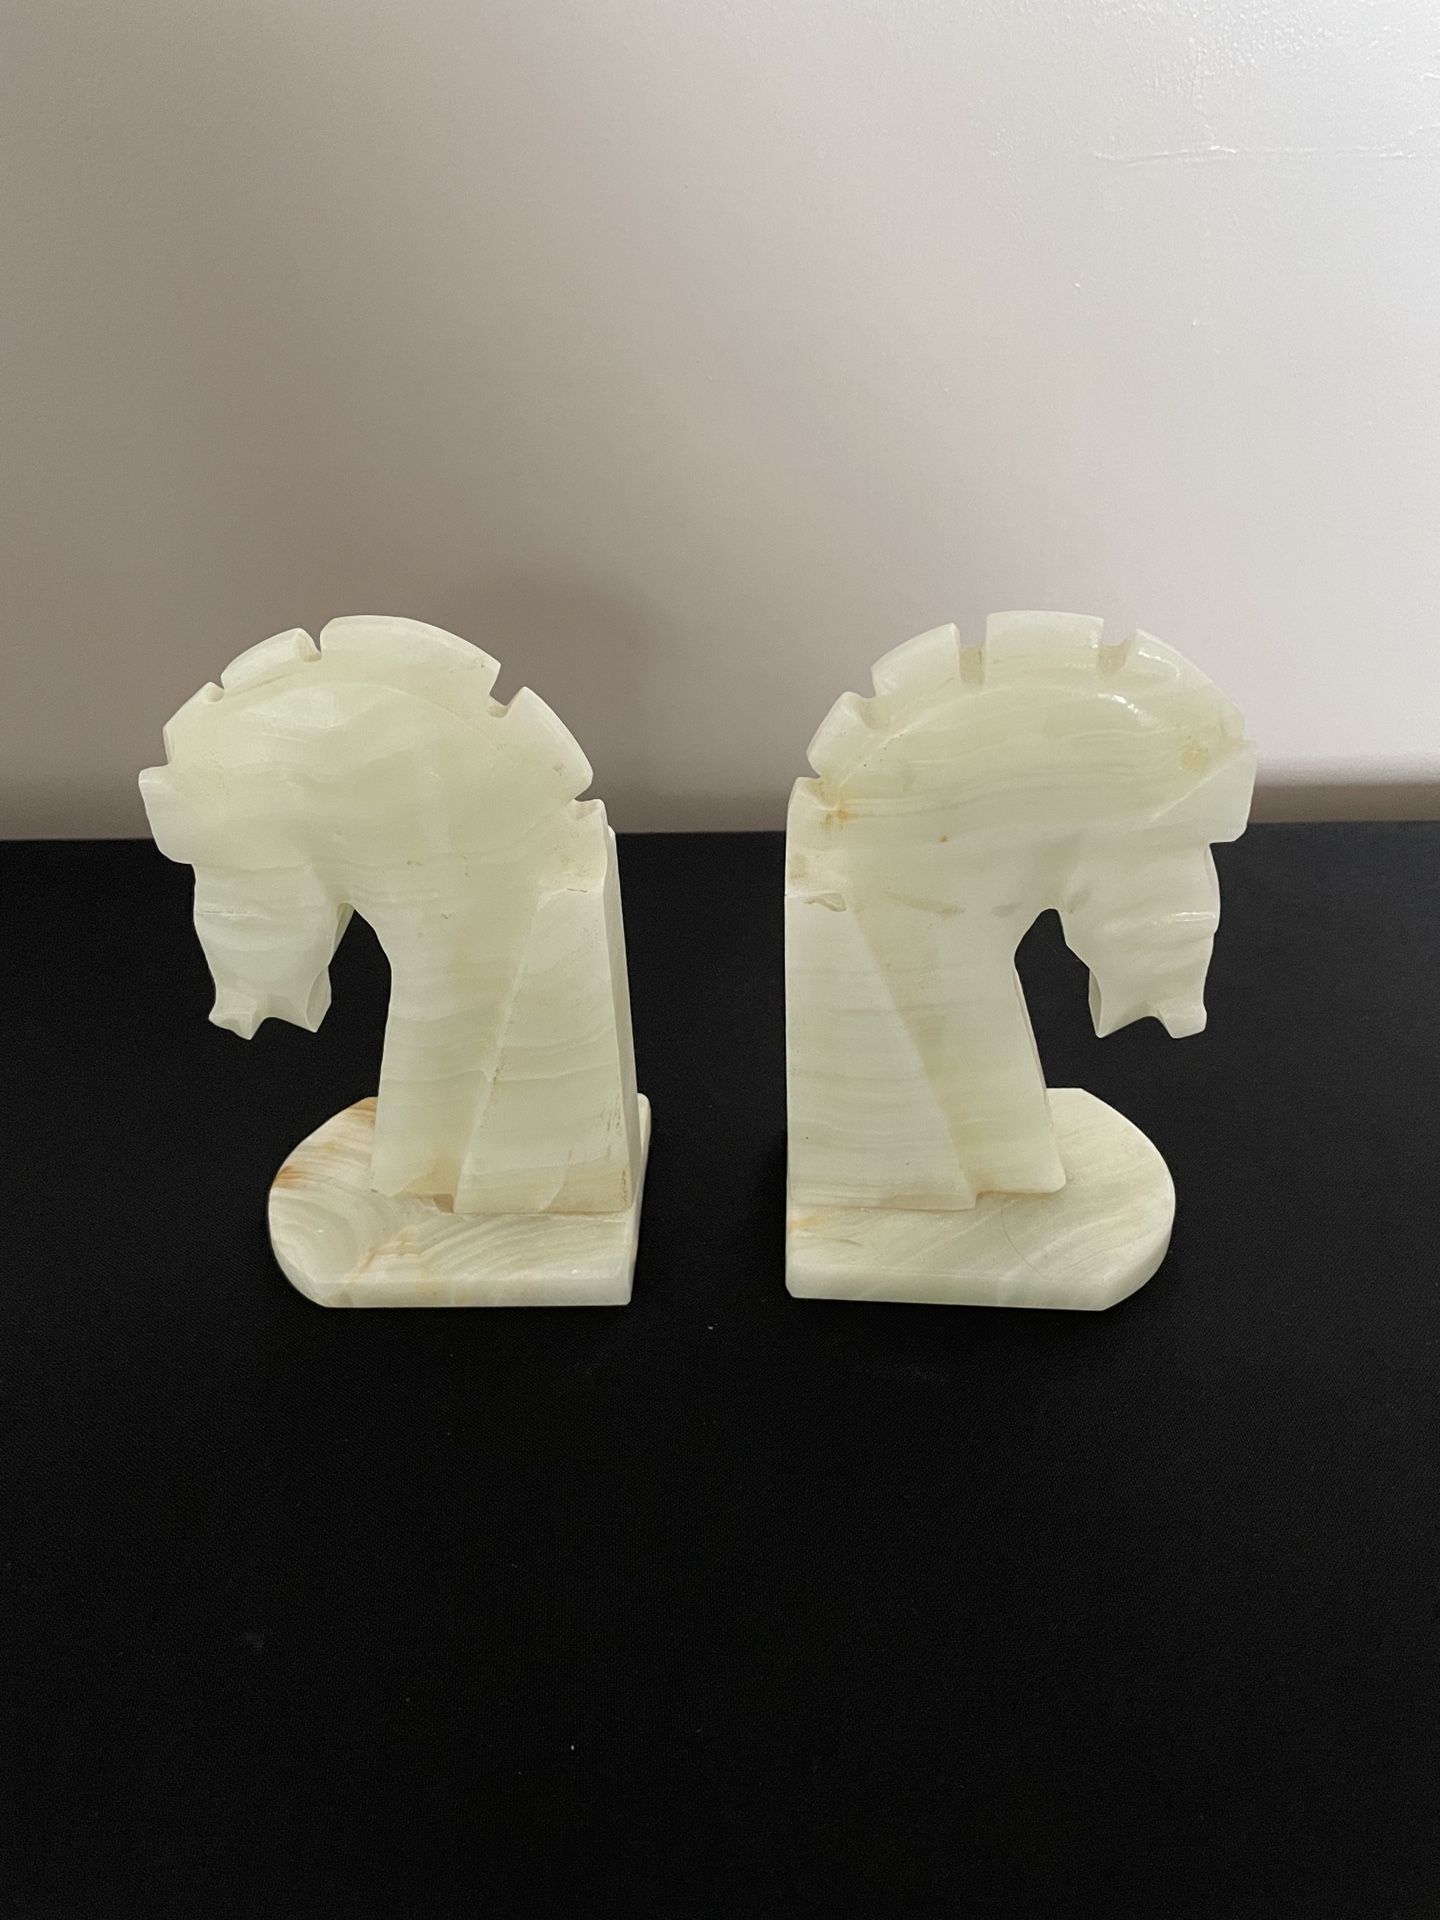 Vintage Marble Bookends 